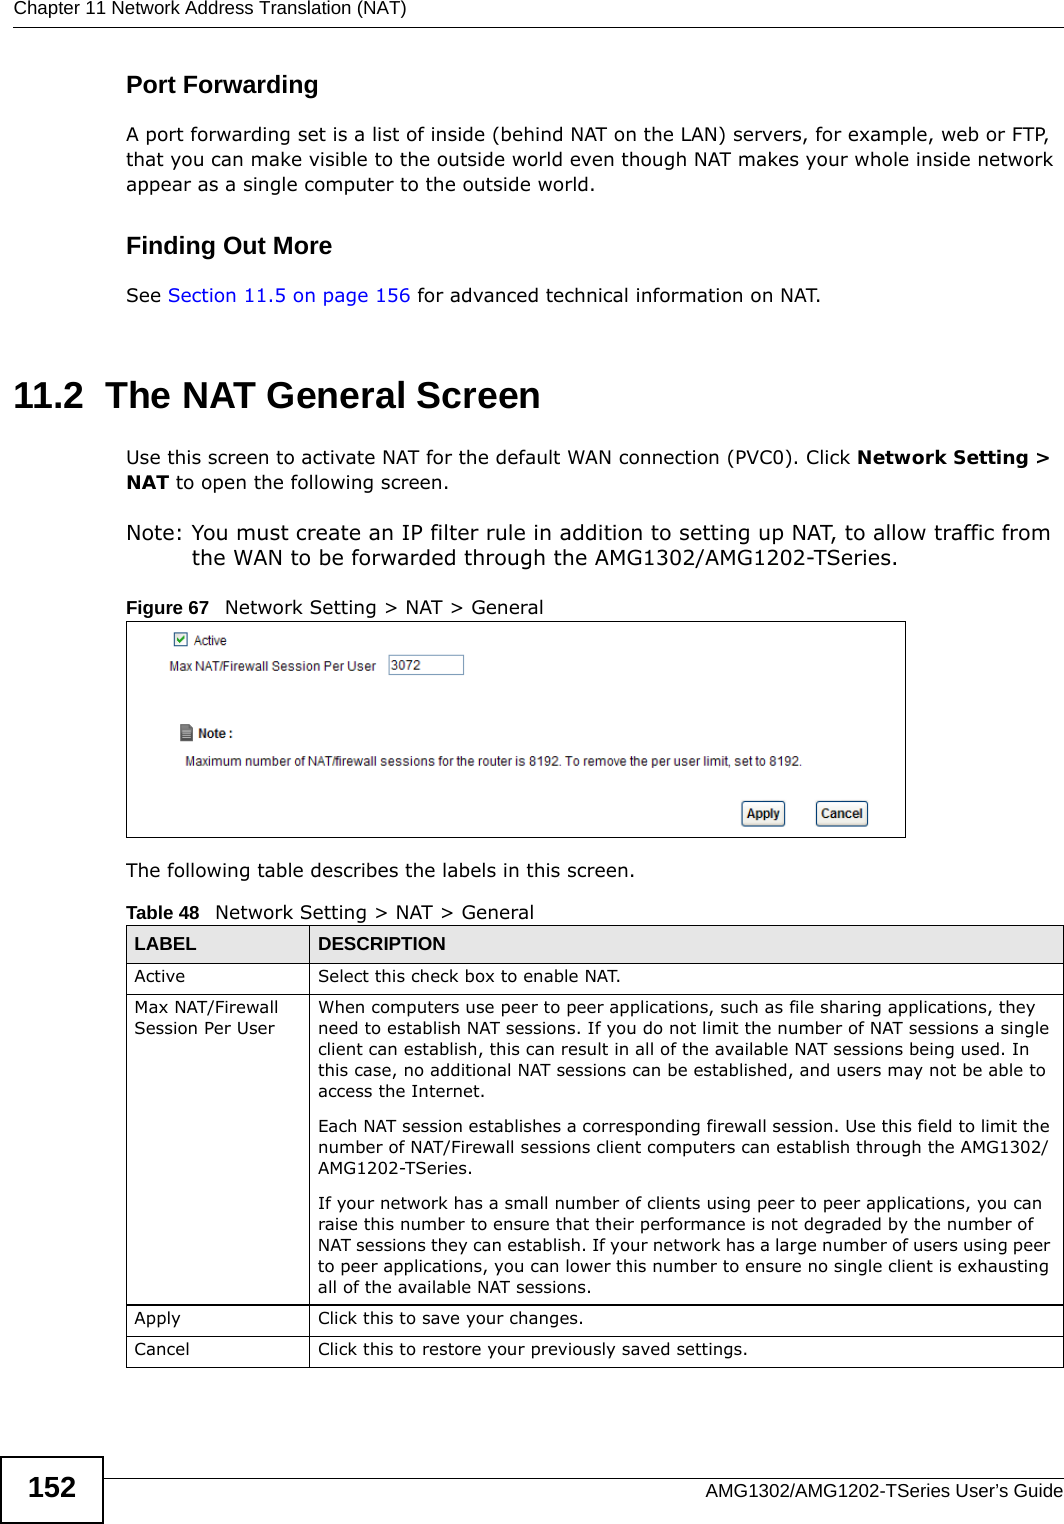 Chapter 11 Network Address Translation (NAT)AMG1302/AMG1202-TSeries User’s Guide152Port ForwardingA port forwarding set is a list of inside (behind NAT on the LAN) servers, for example, web or FTP, that you can make visible to the outside world even though NAT makes your whole inside network appear as a single computer to the outside world.Finding Out MoreSee Section 11.5 on page 156 for advanced technical information on NAT.11.2  The NAT General ScreenUse this screen to activate NAT for the default WAN connection (PVC0). Click Network Setting &gt; NAT to open the following screen.Note: You must create an IP filter rule in addition to setting up NAT, to allow traffic from the WAN to be forwarded through the AMG1302/AMG1202-TSeries.Figure 67   Network Setting &gt; NAT &gt; GeneralThe following table describes the labels in this screen.Table 48   Network Setting &gt; NAT &gt; GeneralLABEL DESCRIPTIONActive Select this check box to enable NAT.Max NAT/Firewall Session Per UserWhen computers use peer to peer applications, such as file sharing applications, they need to establish NAT sessions. If you do not limit the number of NAT sessions a single client can establish, this can result in all of the available NAT sessions being used. In this case, no additional NAT sessions can be established, and users may not be able to access the Internet.Each NAT session establishes a corresponding firewall session. Use this field to limit the number of NAT/Firewall sessions client computers can establish through the AMG1302/AMG1202-TSeries.If your network has a small number of clients using peer to peer applications, you can raise this number to ensure that their performance is not degraded by the number of NAT sessions they can establish. If your network has a large number of users using peer to peer applications, you can lower this number to ensure no single client is exhausting all of the available NAT sessions.Apply Click this to save your changes.Cancel Click this to restore your previously saved settings.